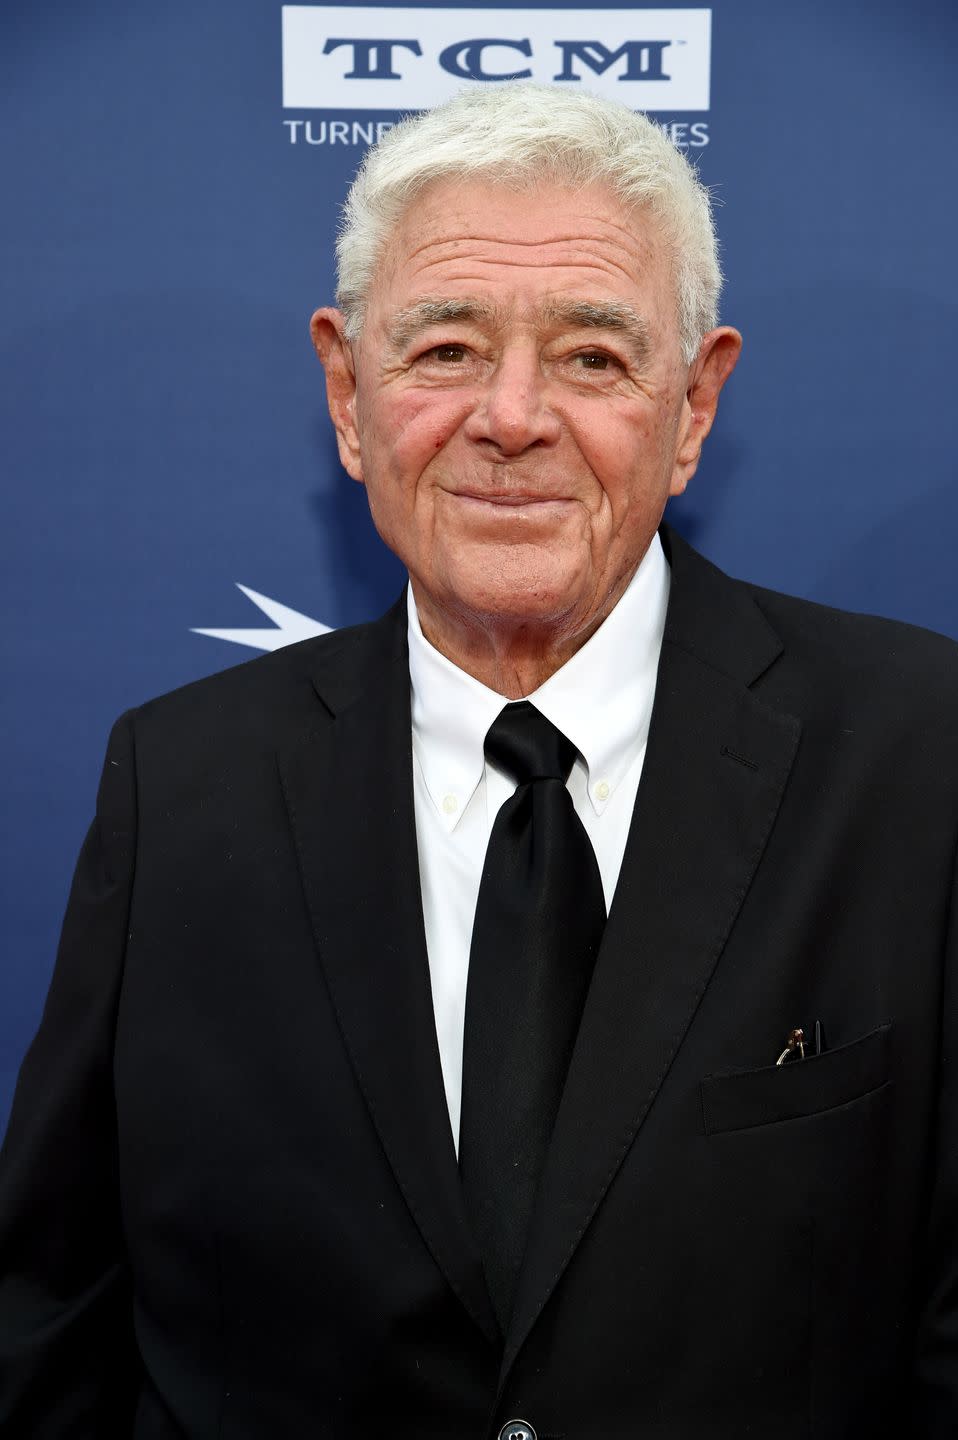 <p>"Richard Donner made the devil a child in The Omen, invented the modern day comic book movie with Superman, and reinvented the buddy cop movie with Lethal Weapon. I got to meet with him last year about a project. Guy was a natural born storyteller. Thanks for all the flicks, Dick!" - Kevin Smith </p><p>"Richard Donner's big heart & effervescent charm shone in his movies through the remarkable performances of his cast, which is no mean feat. You remember all the characters in Superman, Lethal Weapon, The Goonies & more, because Donner knew how to capture that magic onscreen.</p><p>"One Donner film I saw young & return to often is The Omen. Because it's oft imitated, it doesn't get the credit for being a perfectly paced & performed horror movie. I think of it as the first 80's movie in the 70's. David Warner's story in it is burned in my mind forever.</p><p>"I only met Richard once and he was funny, charming and so full of stories (and happy to indulge my geeky questions). I'm sad I'll never get to meet him again. RIP." - Edgar Wright</p>